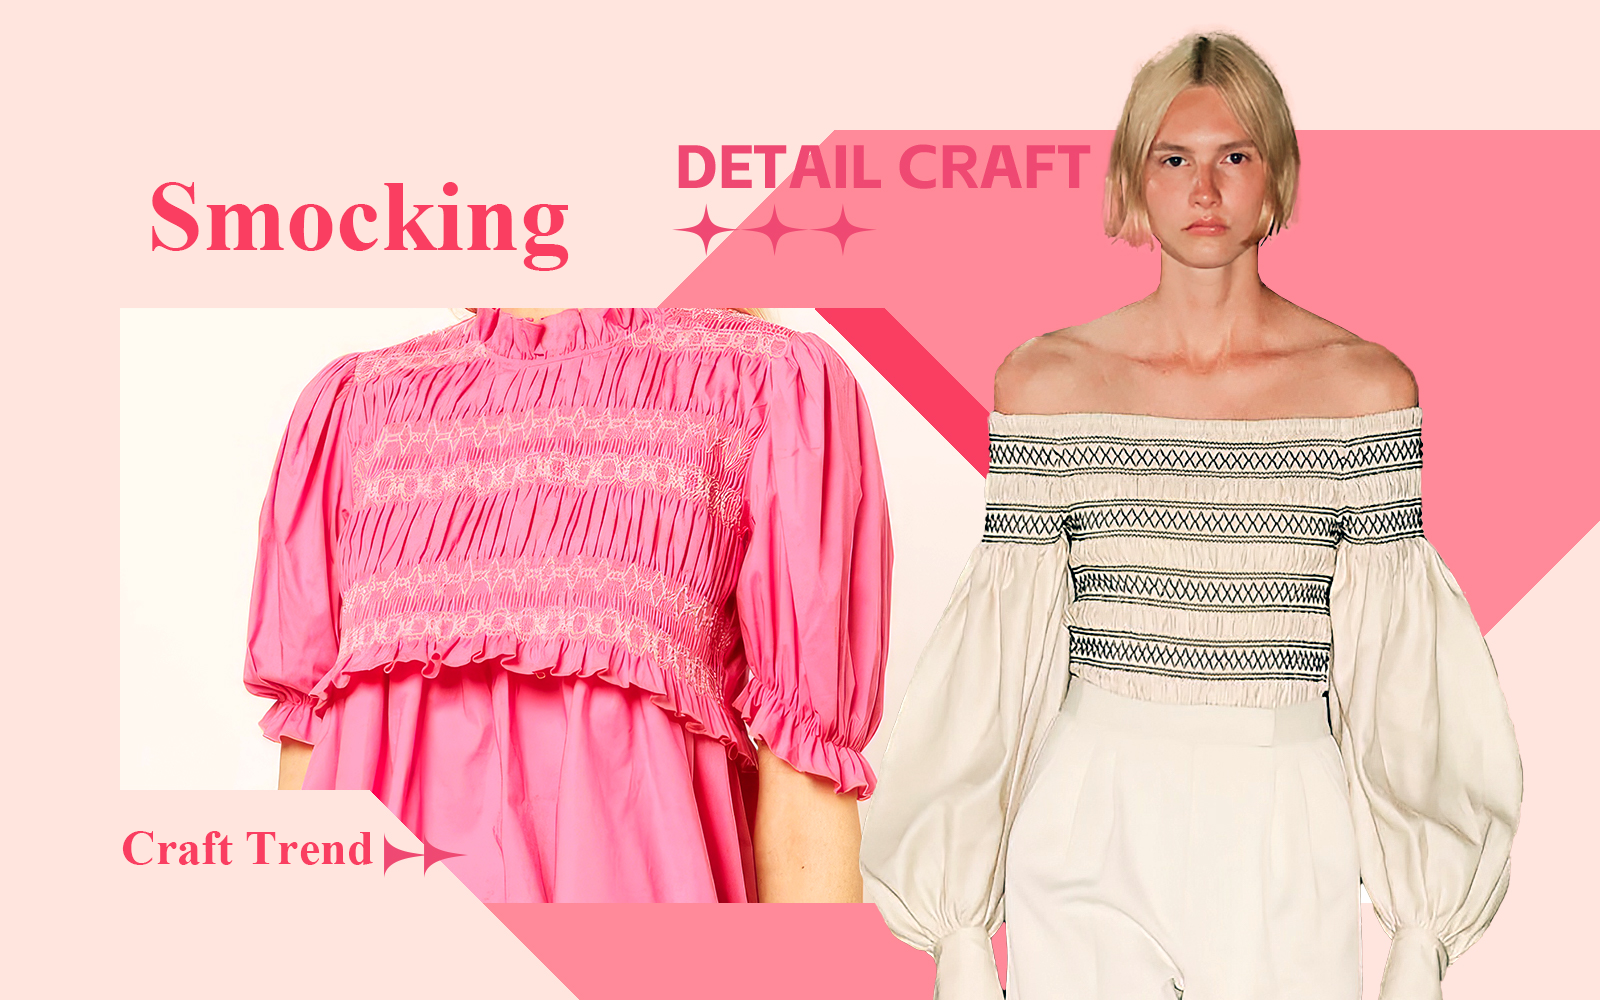 Smocking -- The Craft Trend for Womenswear